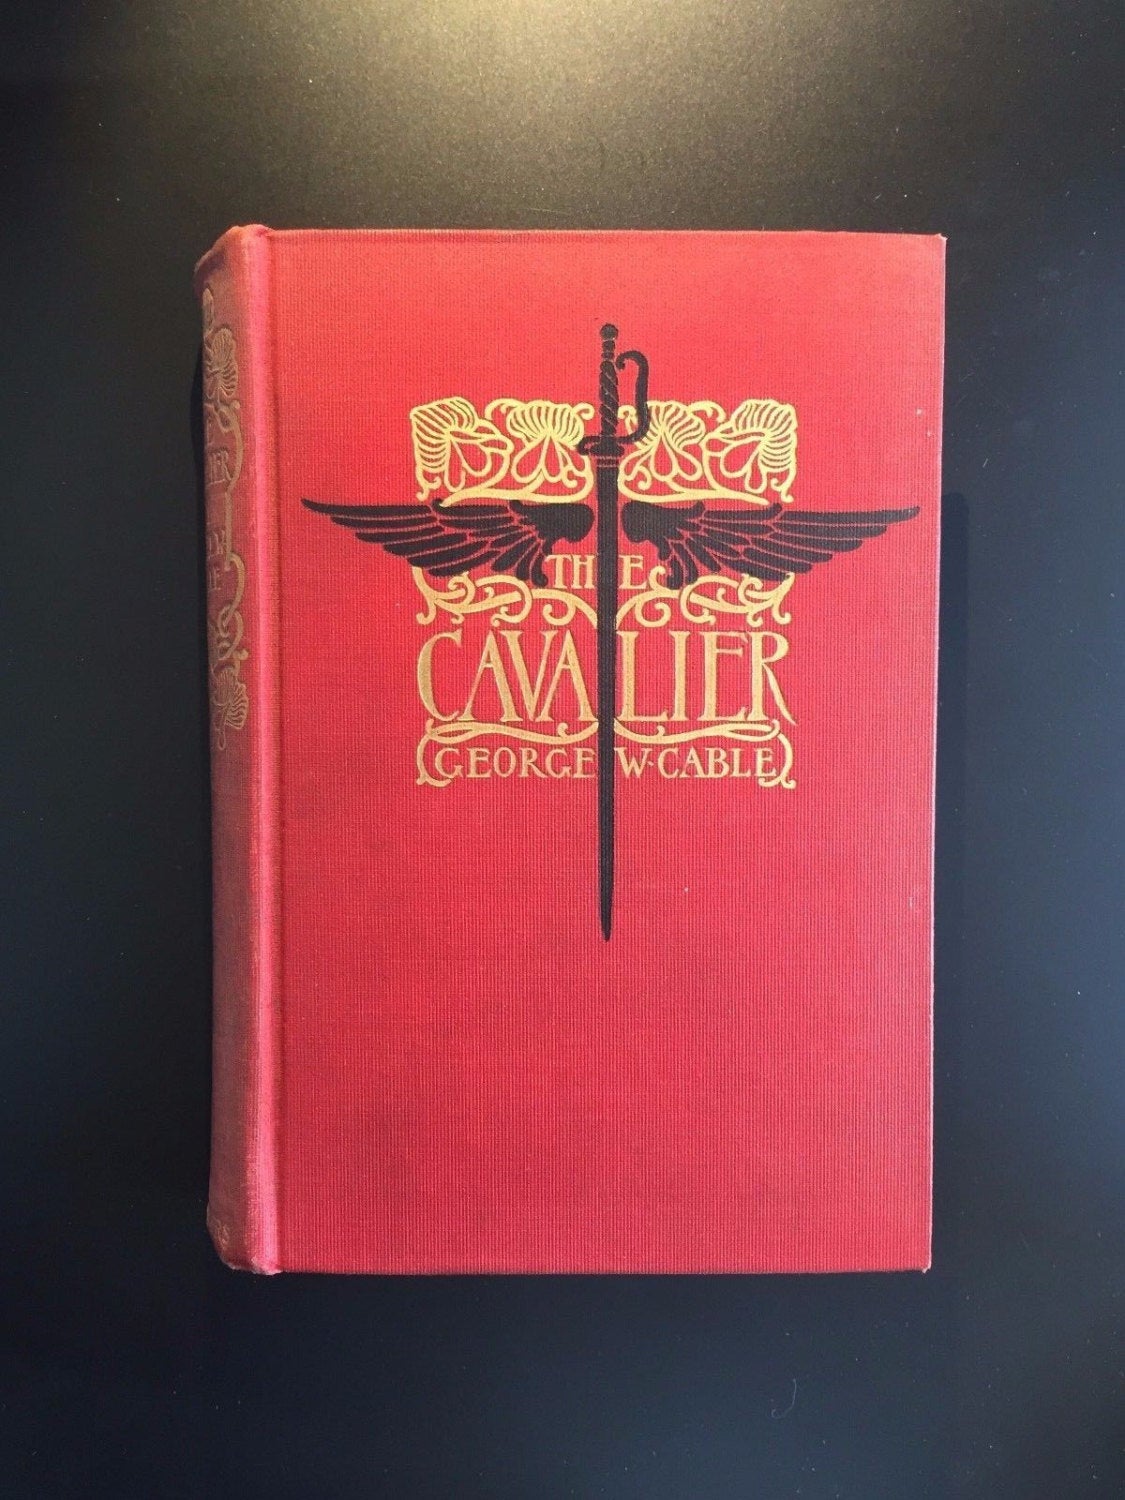 The Cavalier, George W. Cable, Illustrated by H. C. Christy, 1st. Ed., 1901, Margaret Armstrong Cover